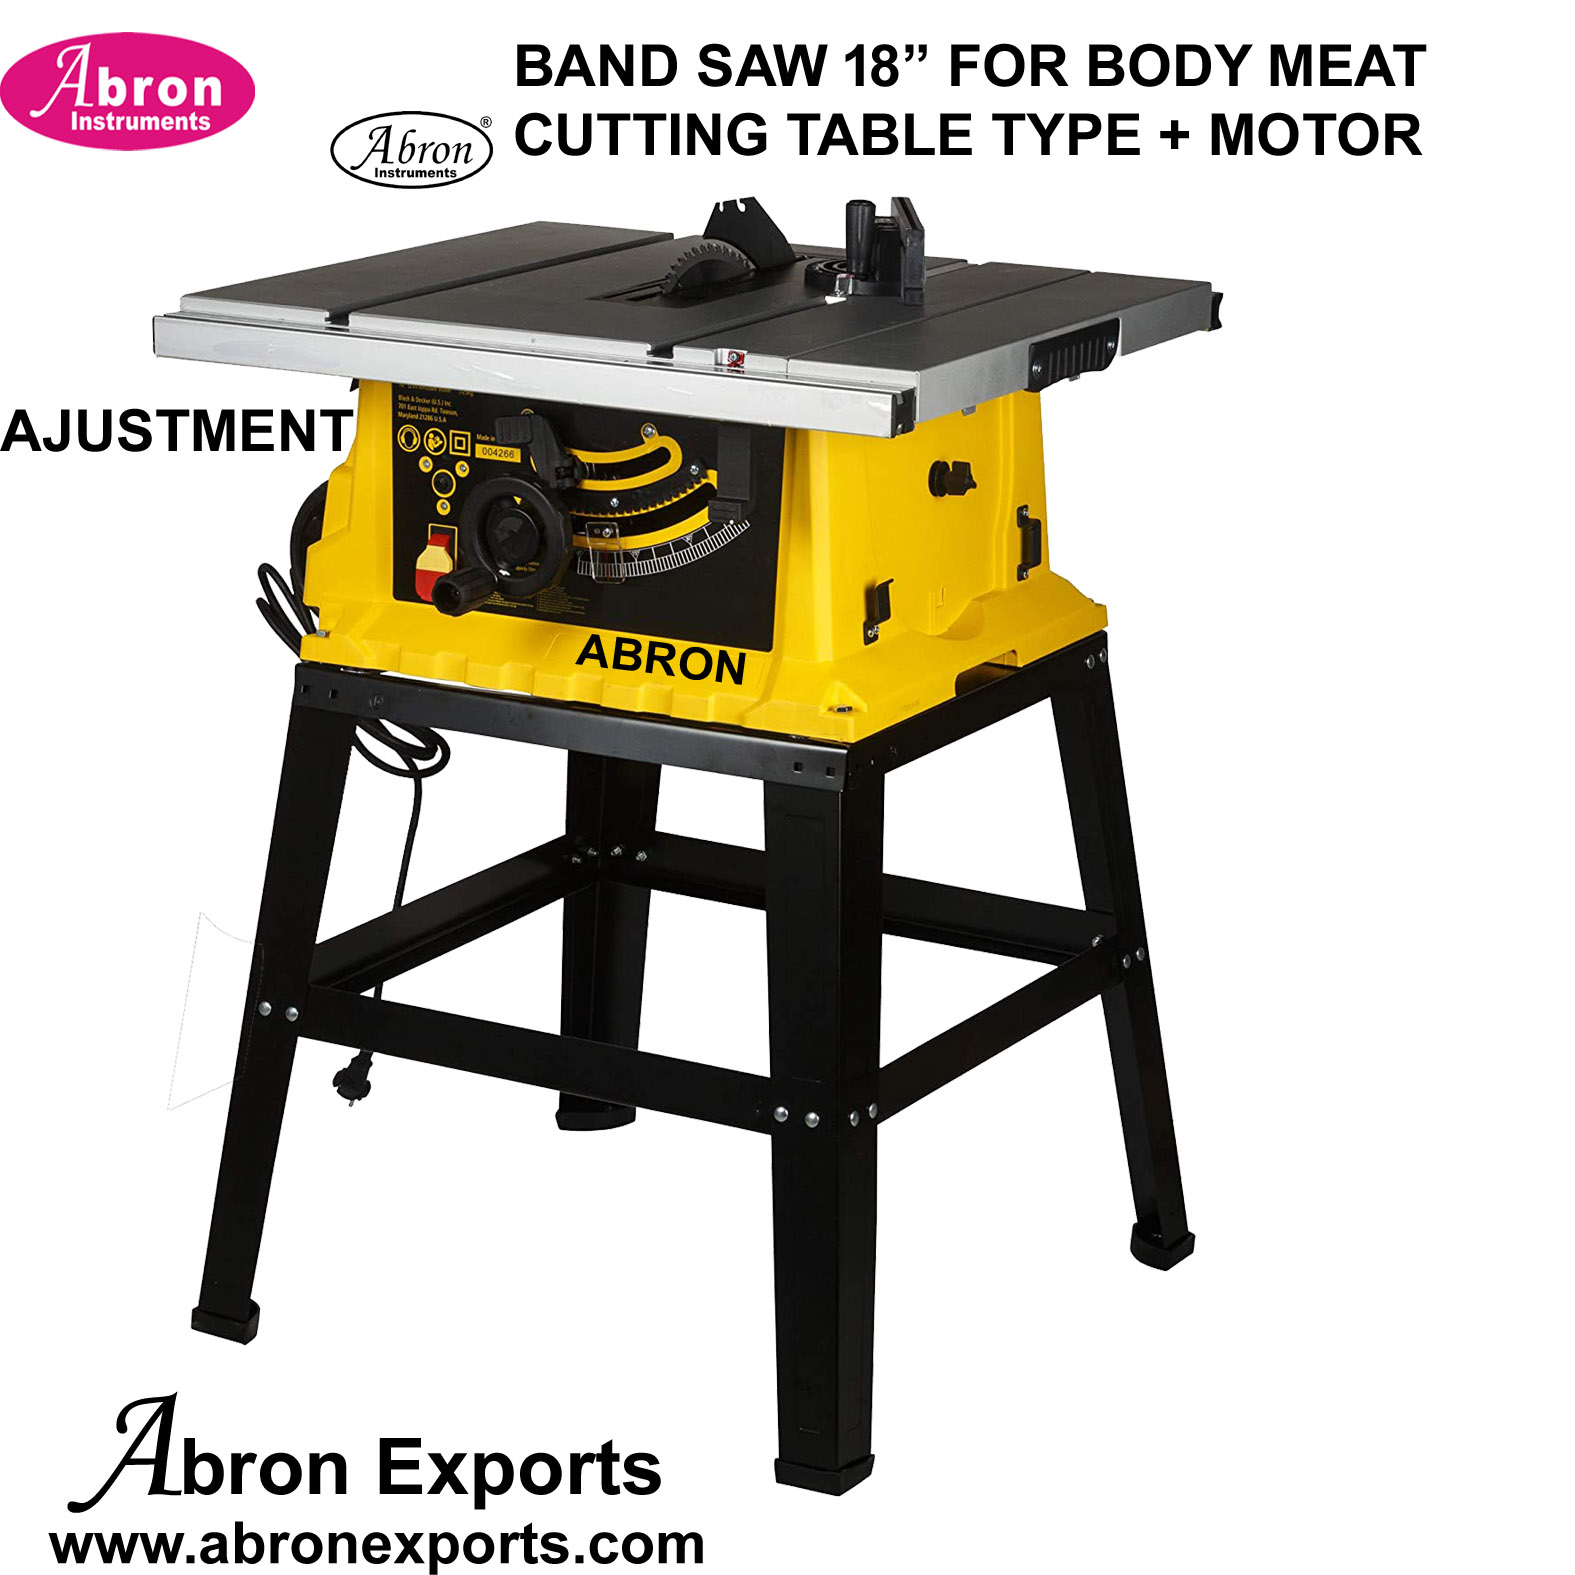 Band saw 10 inch medical college body parts cutting parts demo By abron ABM-7500BS10